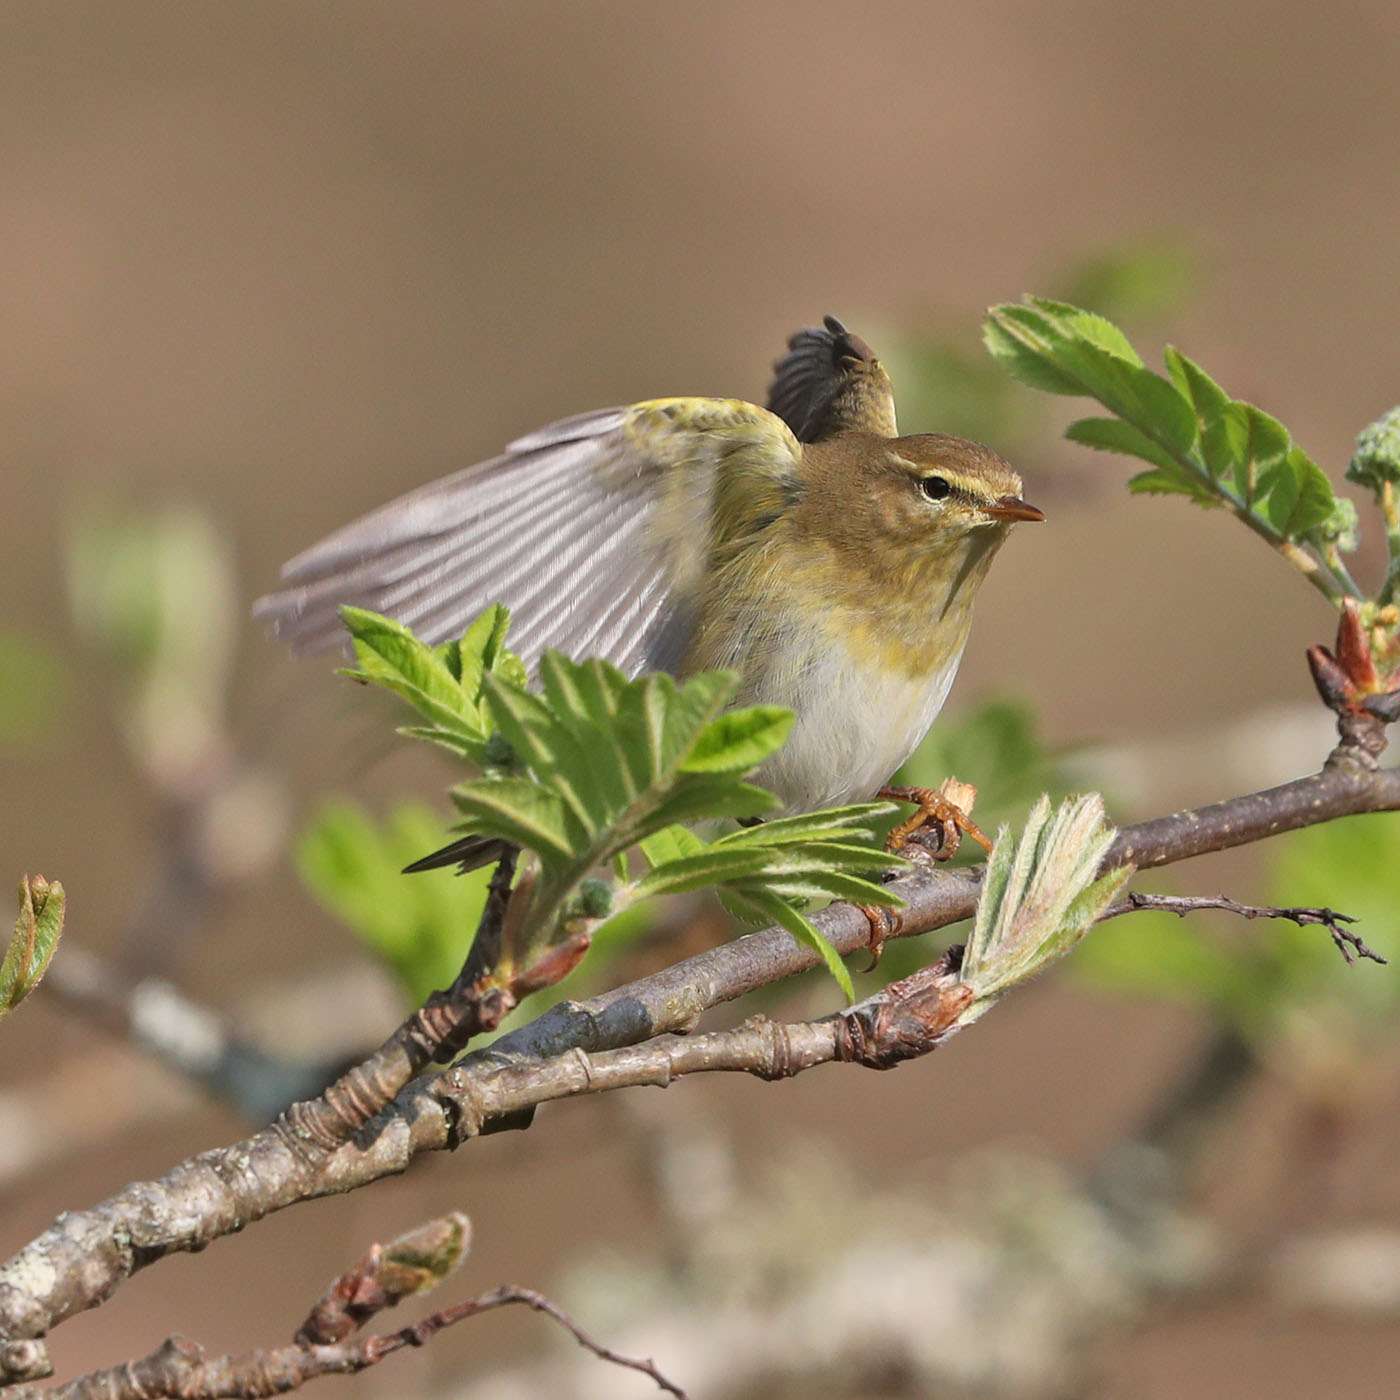 Willow Warbler by Steve Hopper at South Brent